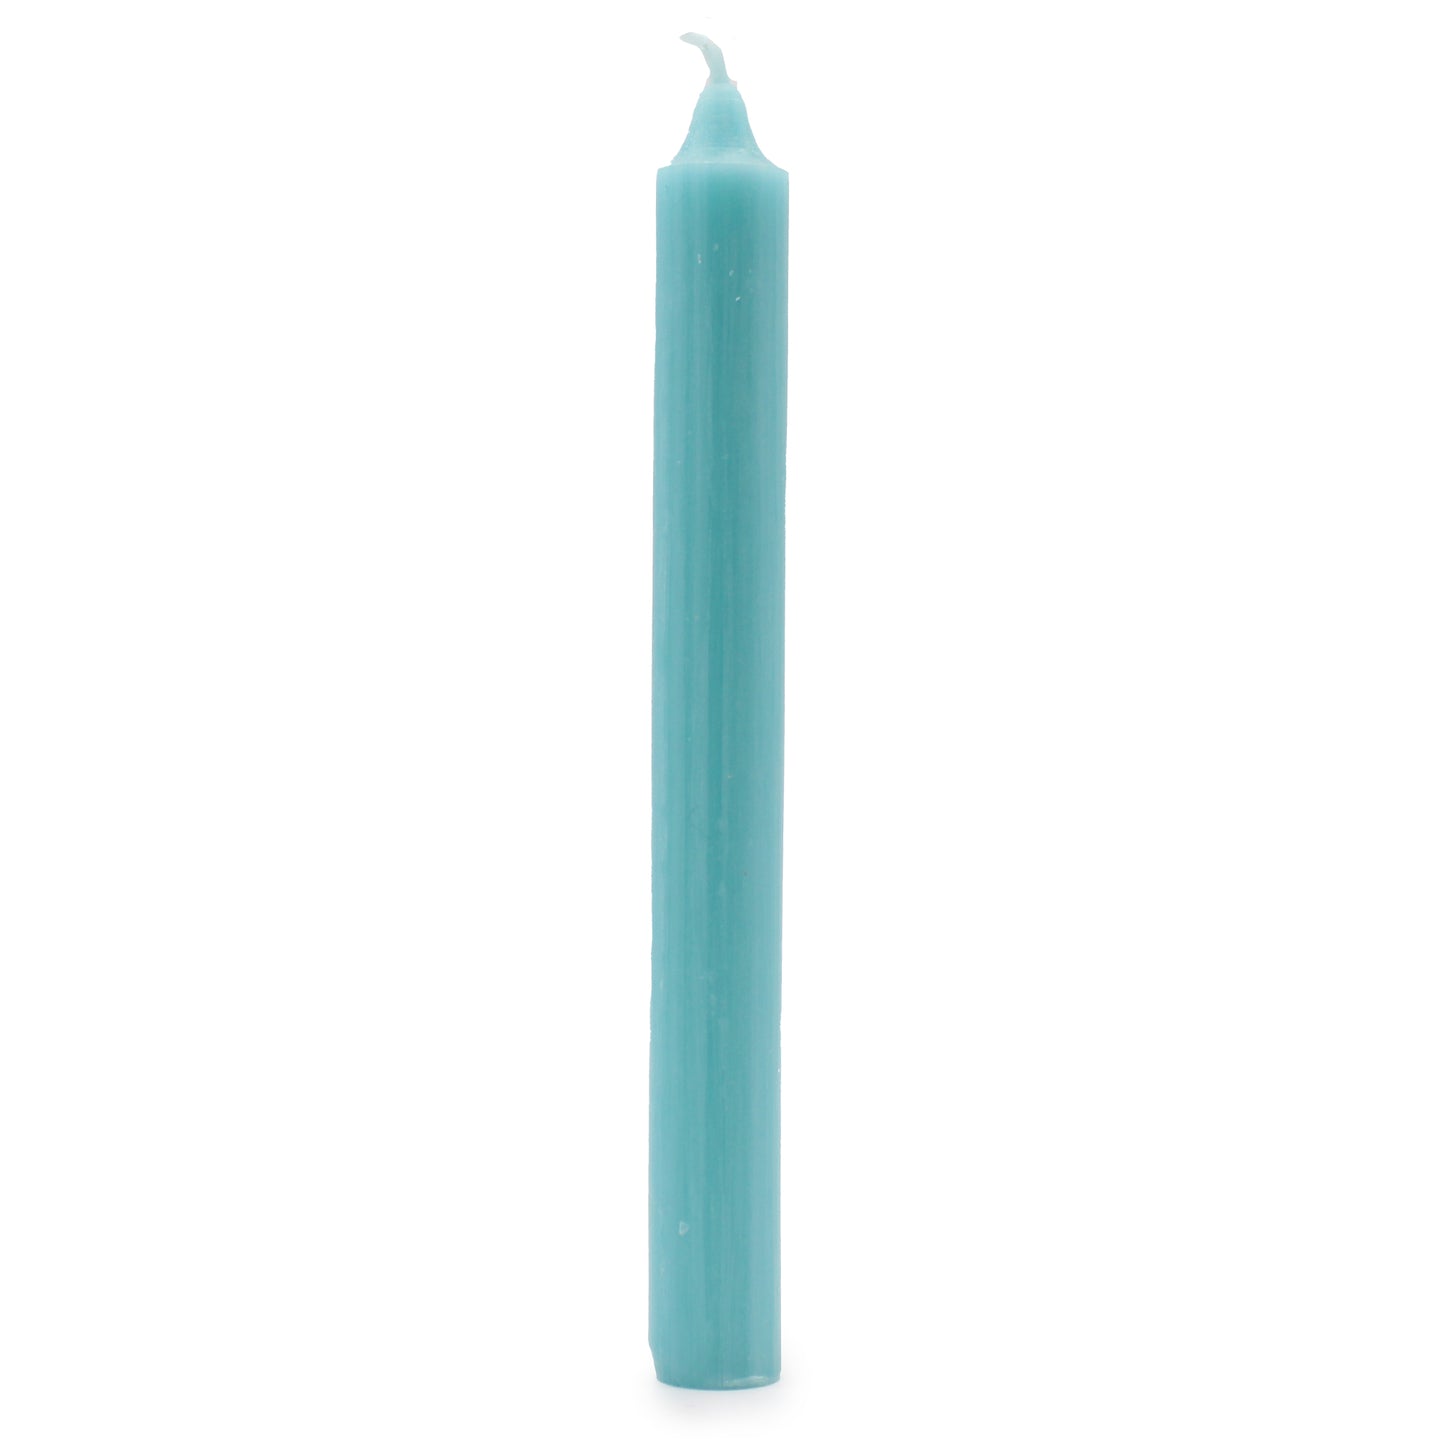 Solid Colour Dinner Candles - Rustic Aqua - Pack of 5